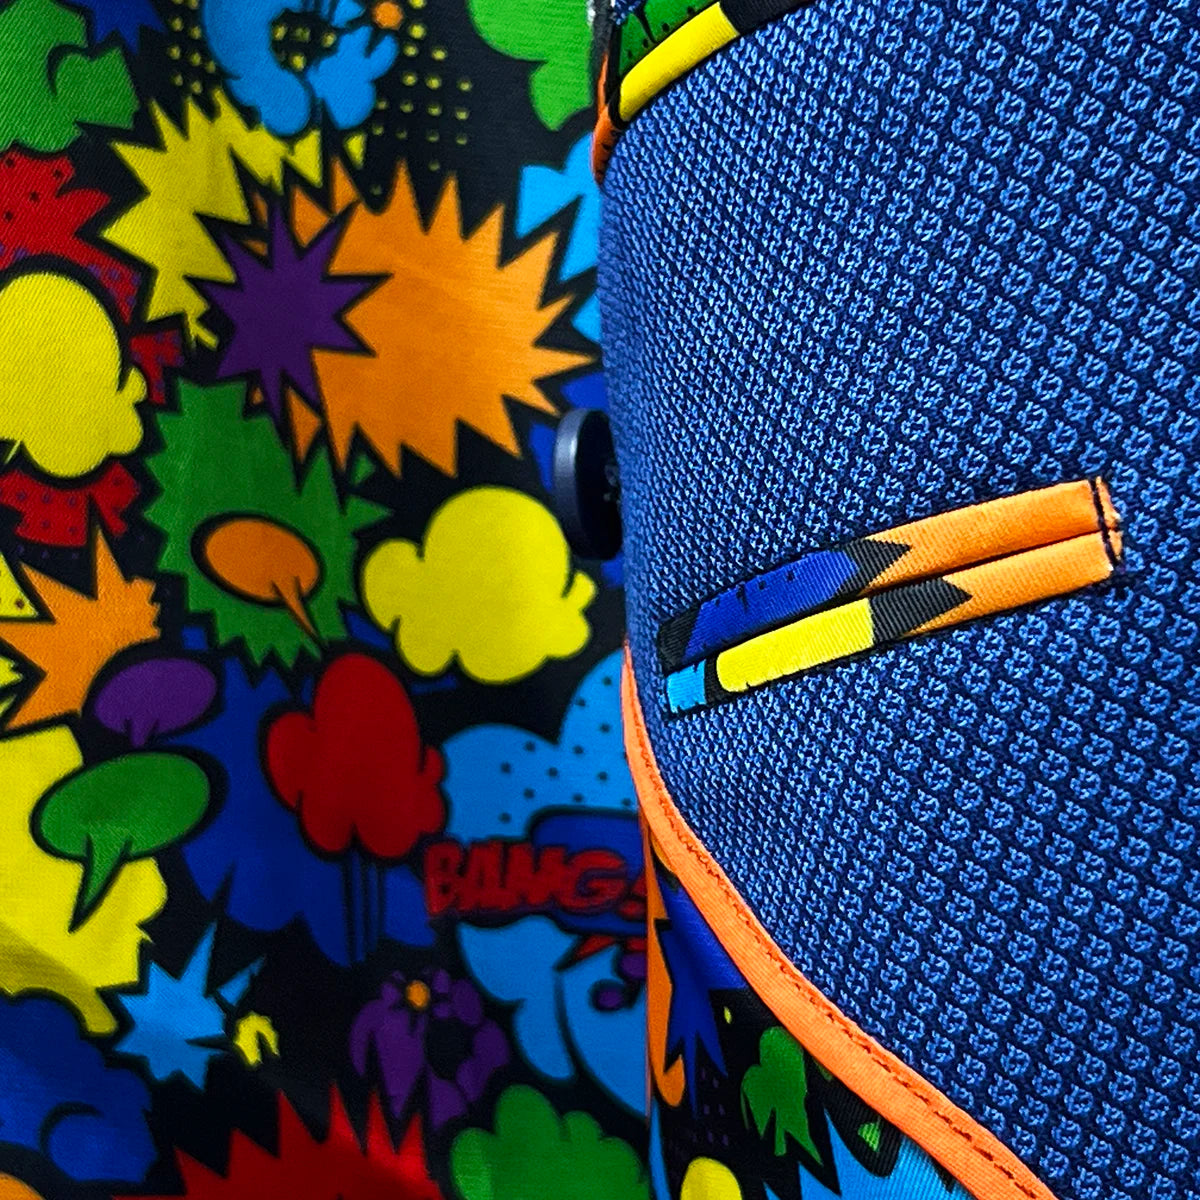 Inside view of the men's sapphire blue suit showing the colorful comics fancy lining with expressions like "wham!" and "pow!", bringing a playful element to the sophisticated attire.